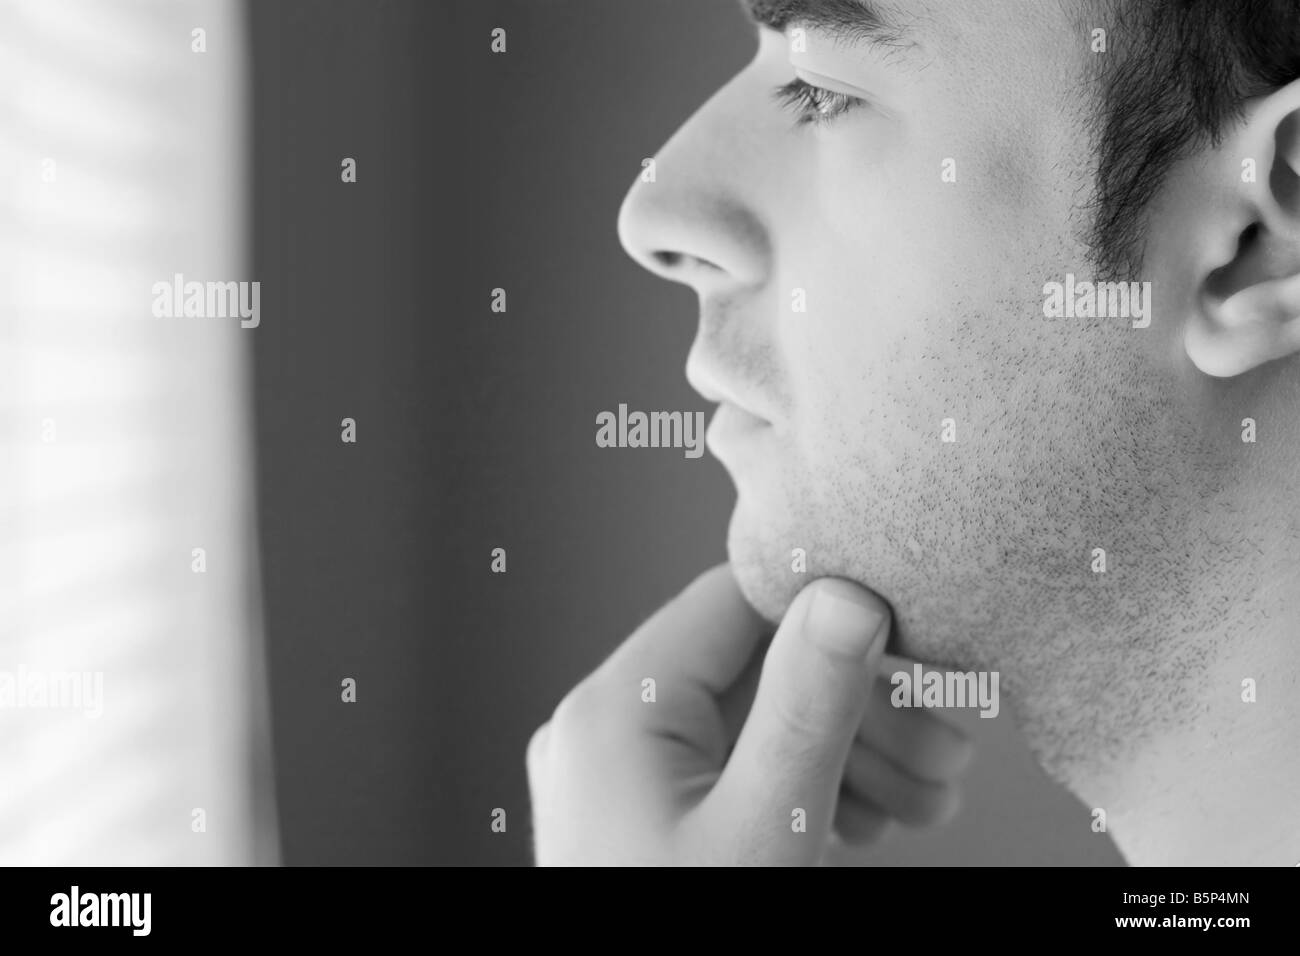 A young man with his hand on his chin thinking an important decision black and white Stock Photo